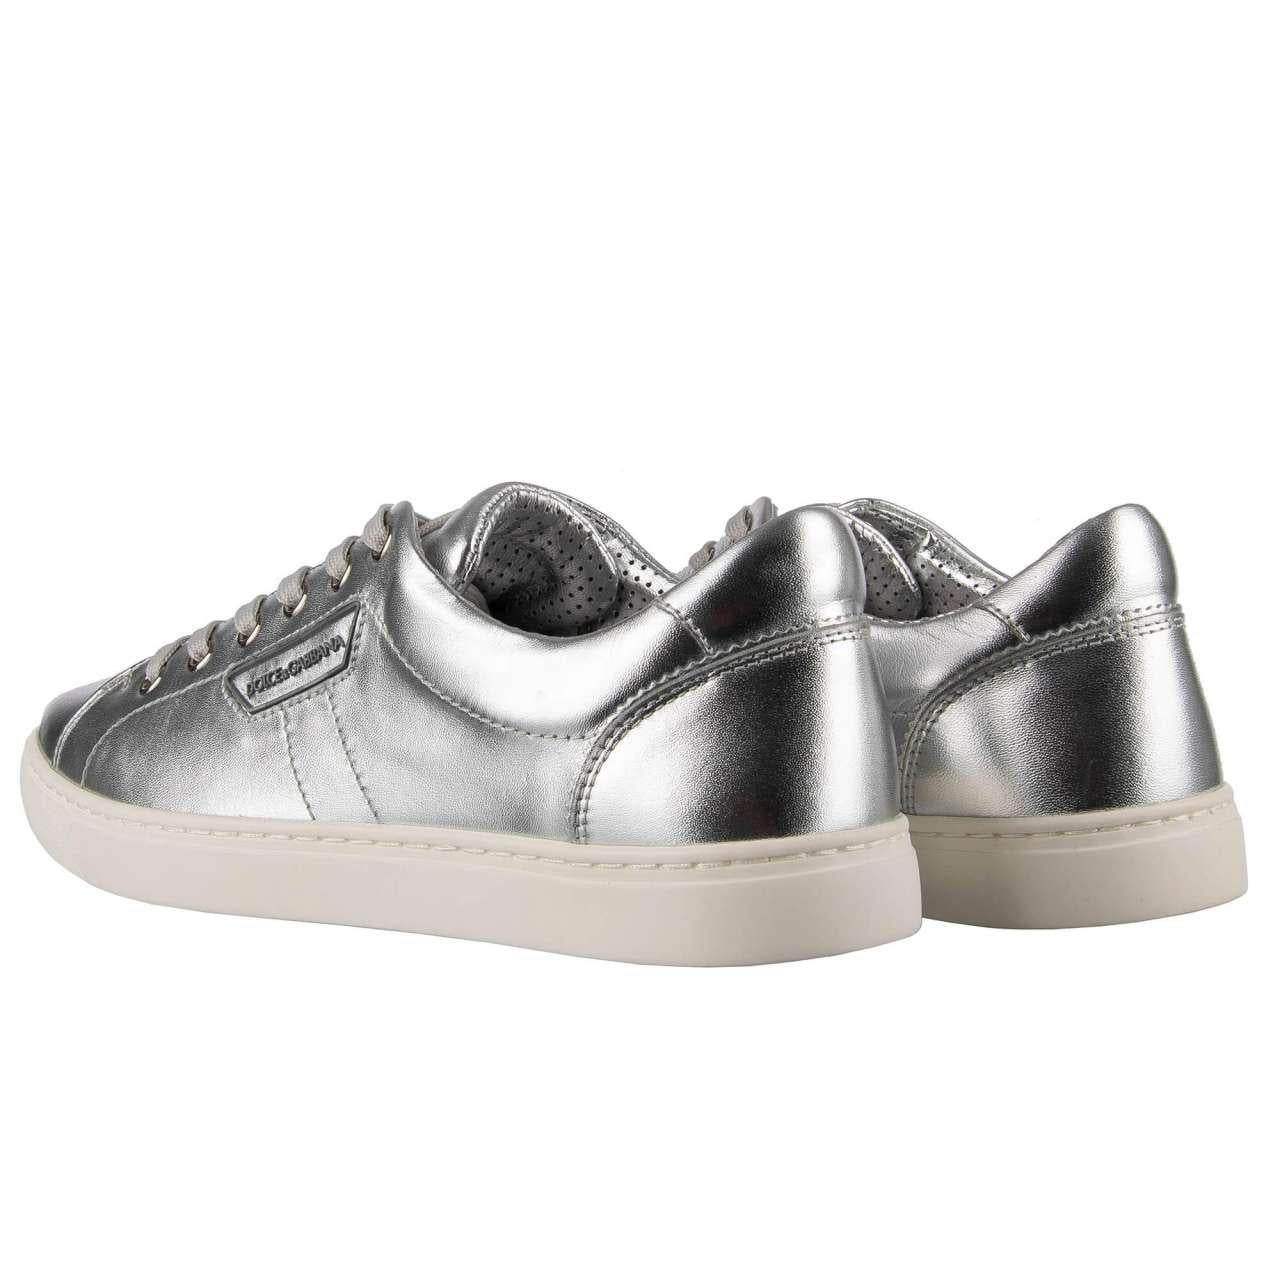 Dolce & Gabbana - Nappa Leather Sneakers LONDON Silver EUR 39 In Excellent Condition For Sale In Erkrath, DE